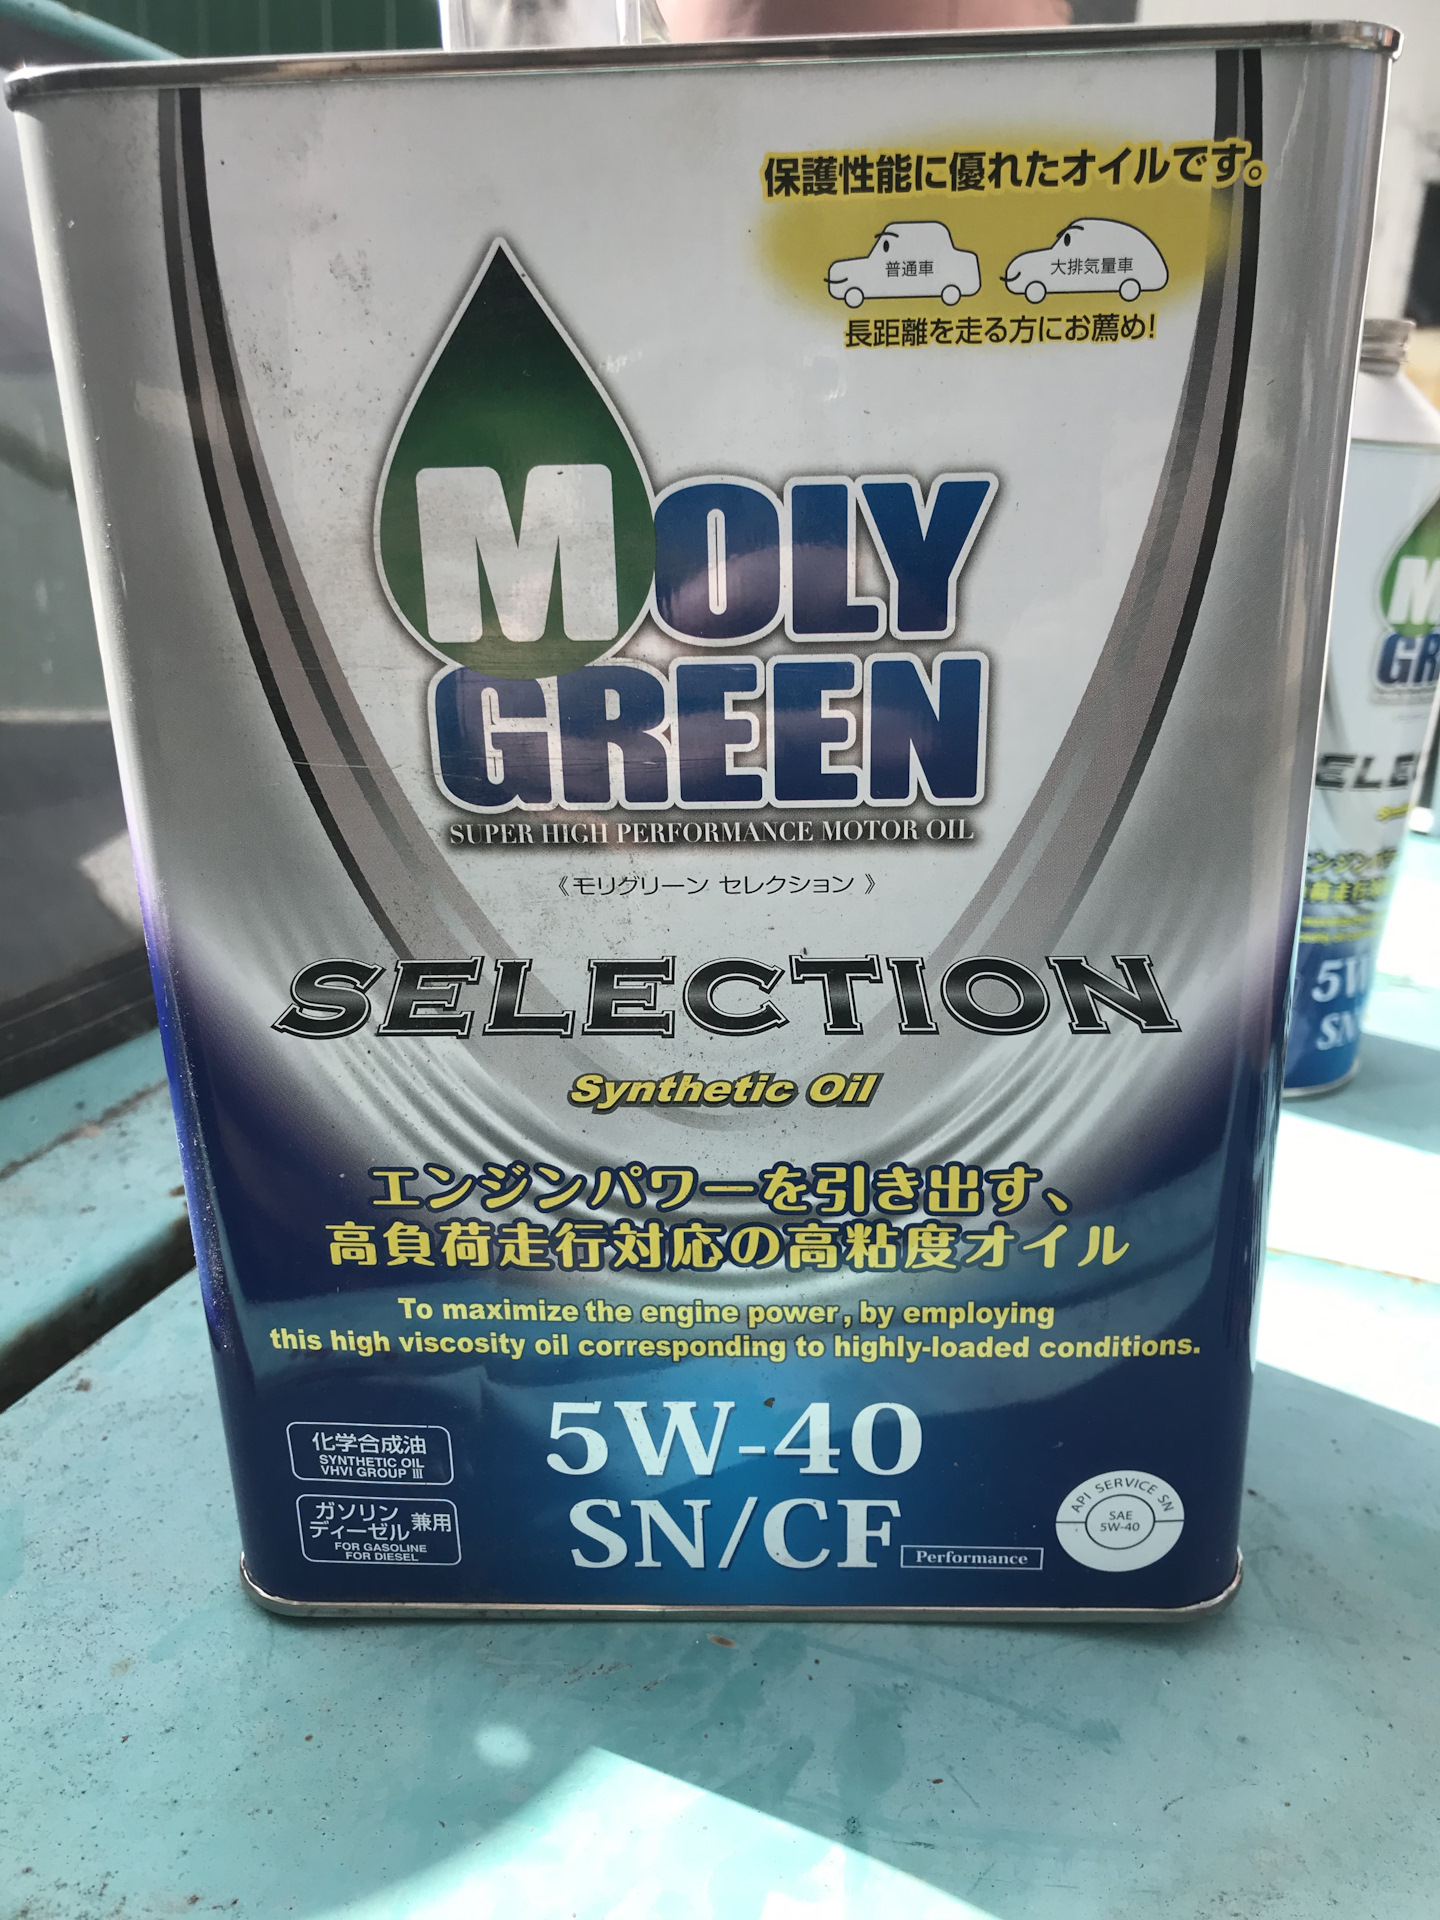 Moly green 5w40. Moly Green selection 5w40. Масло моли Грин 5w40. Moly Green perfect 5w40 SL /SM.